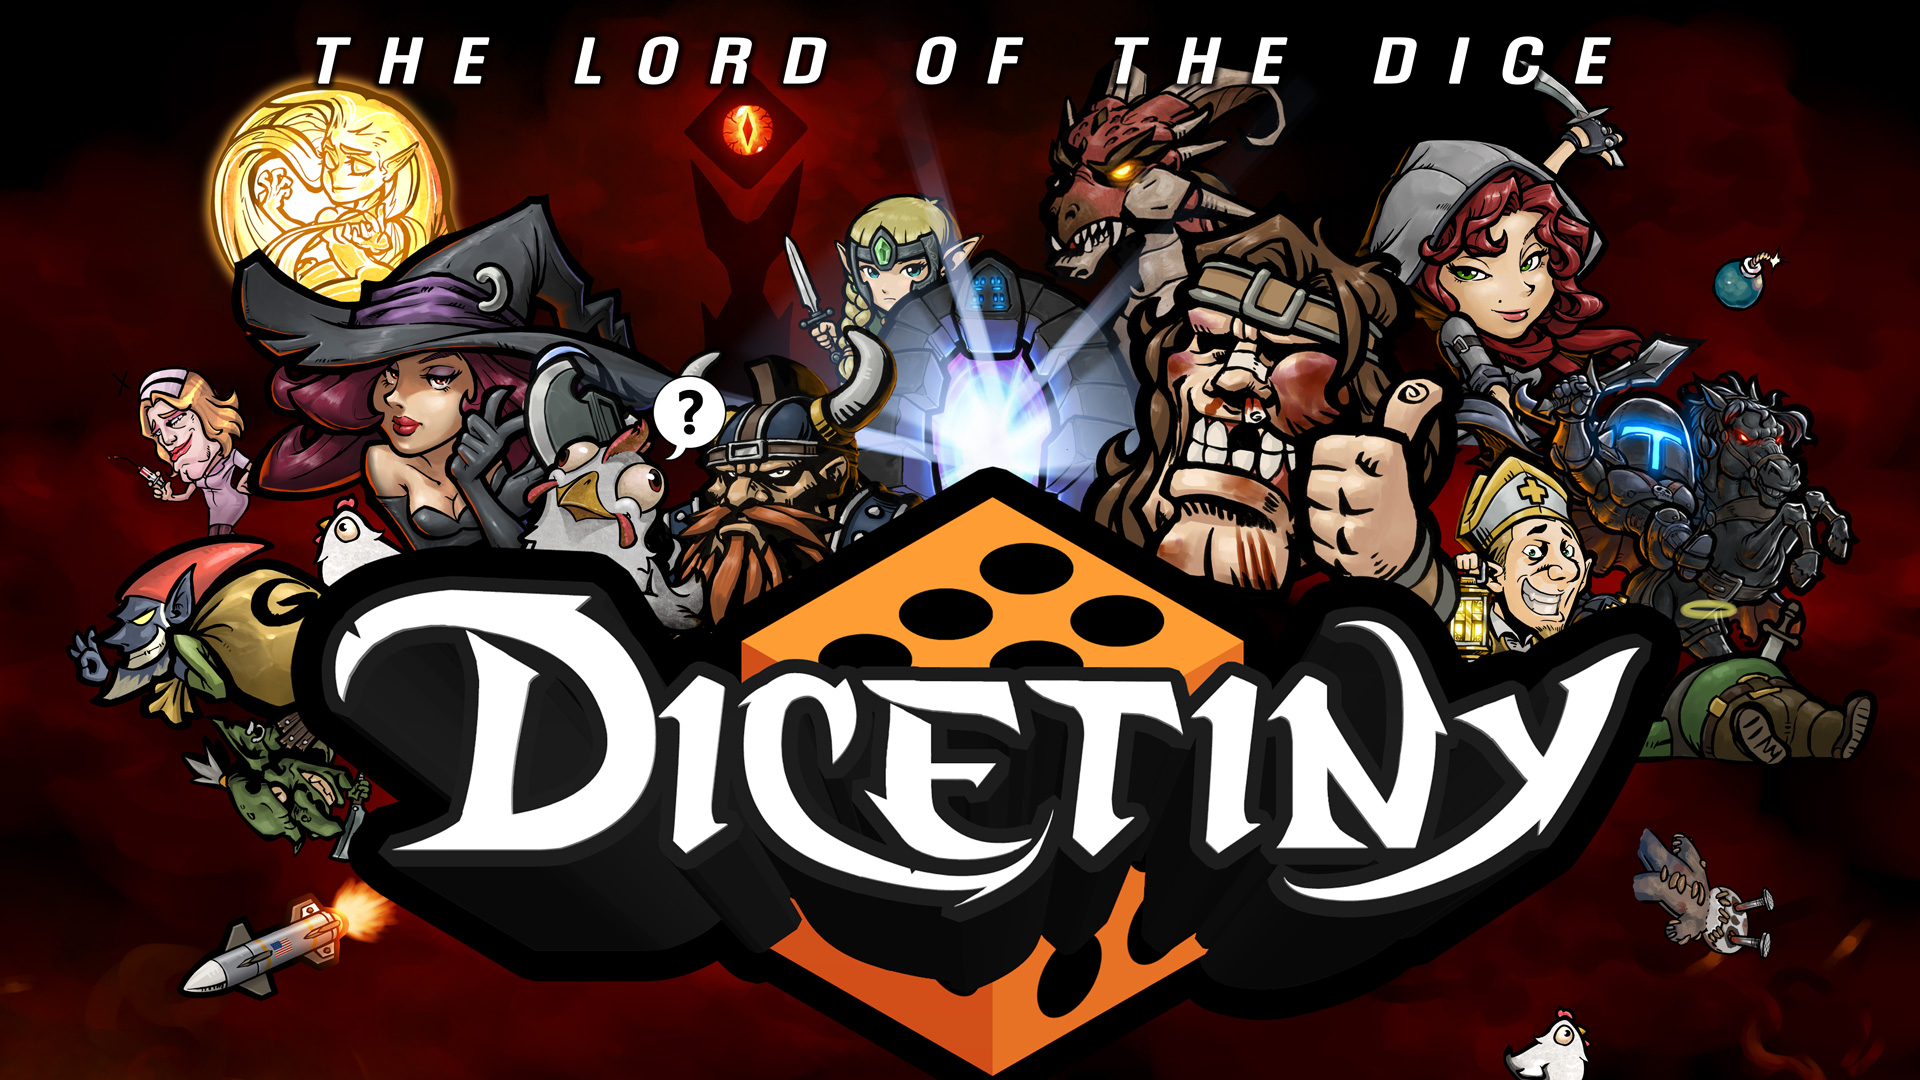 DICETINY: The Lord of the Dice screenshot